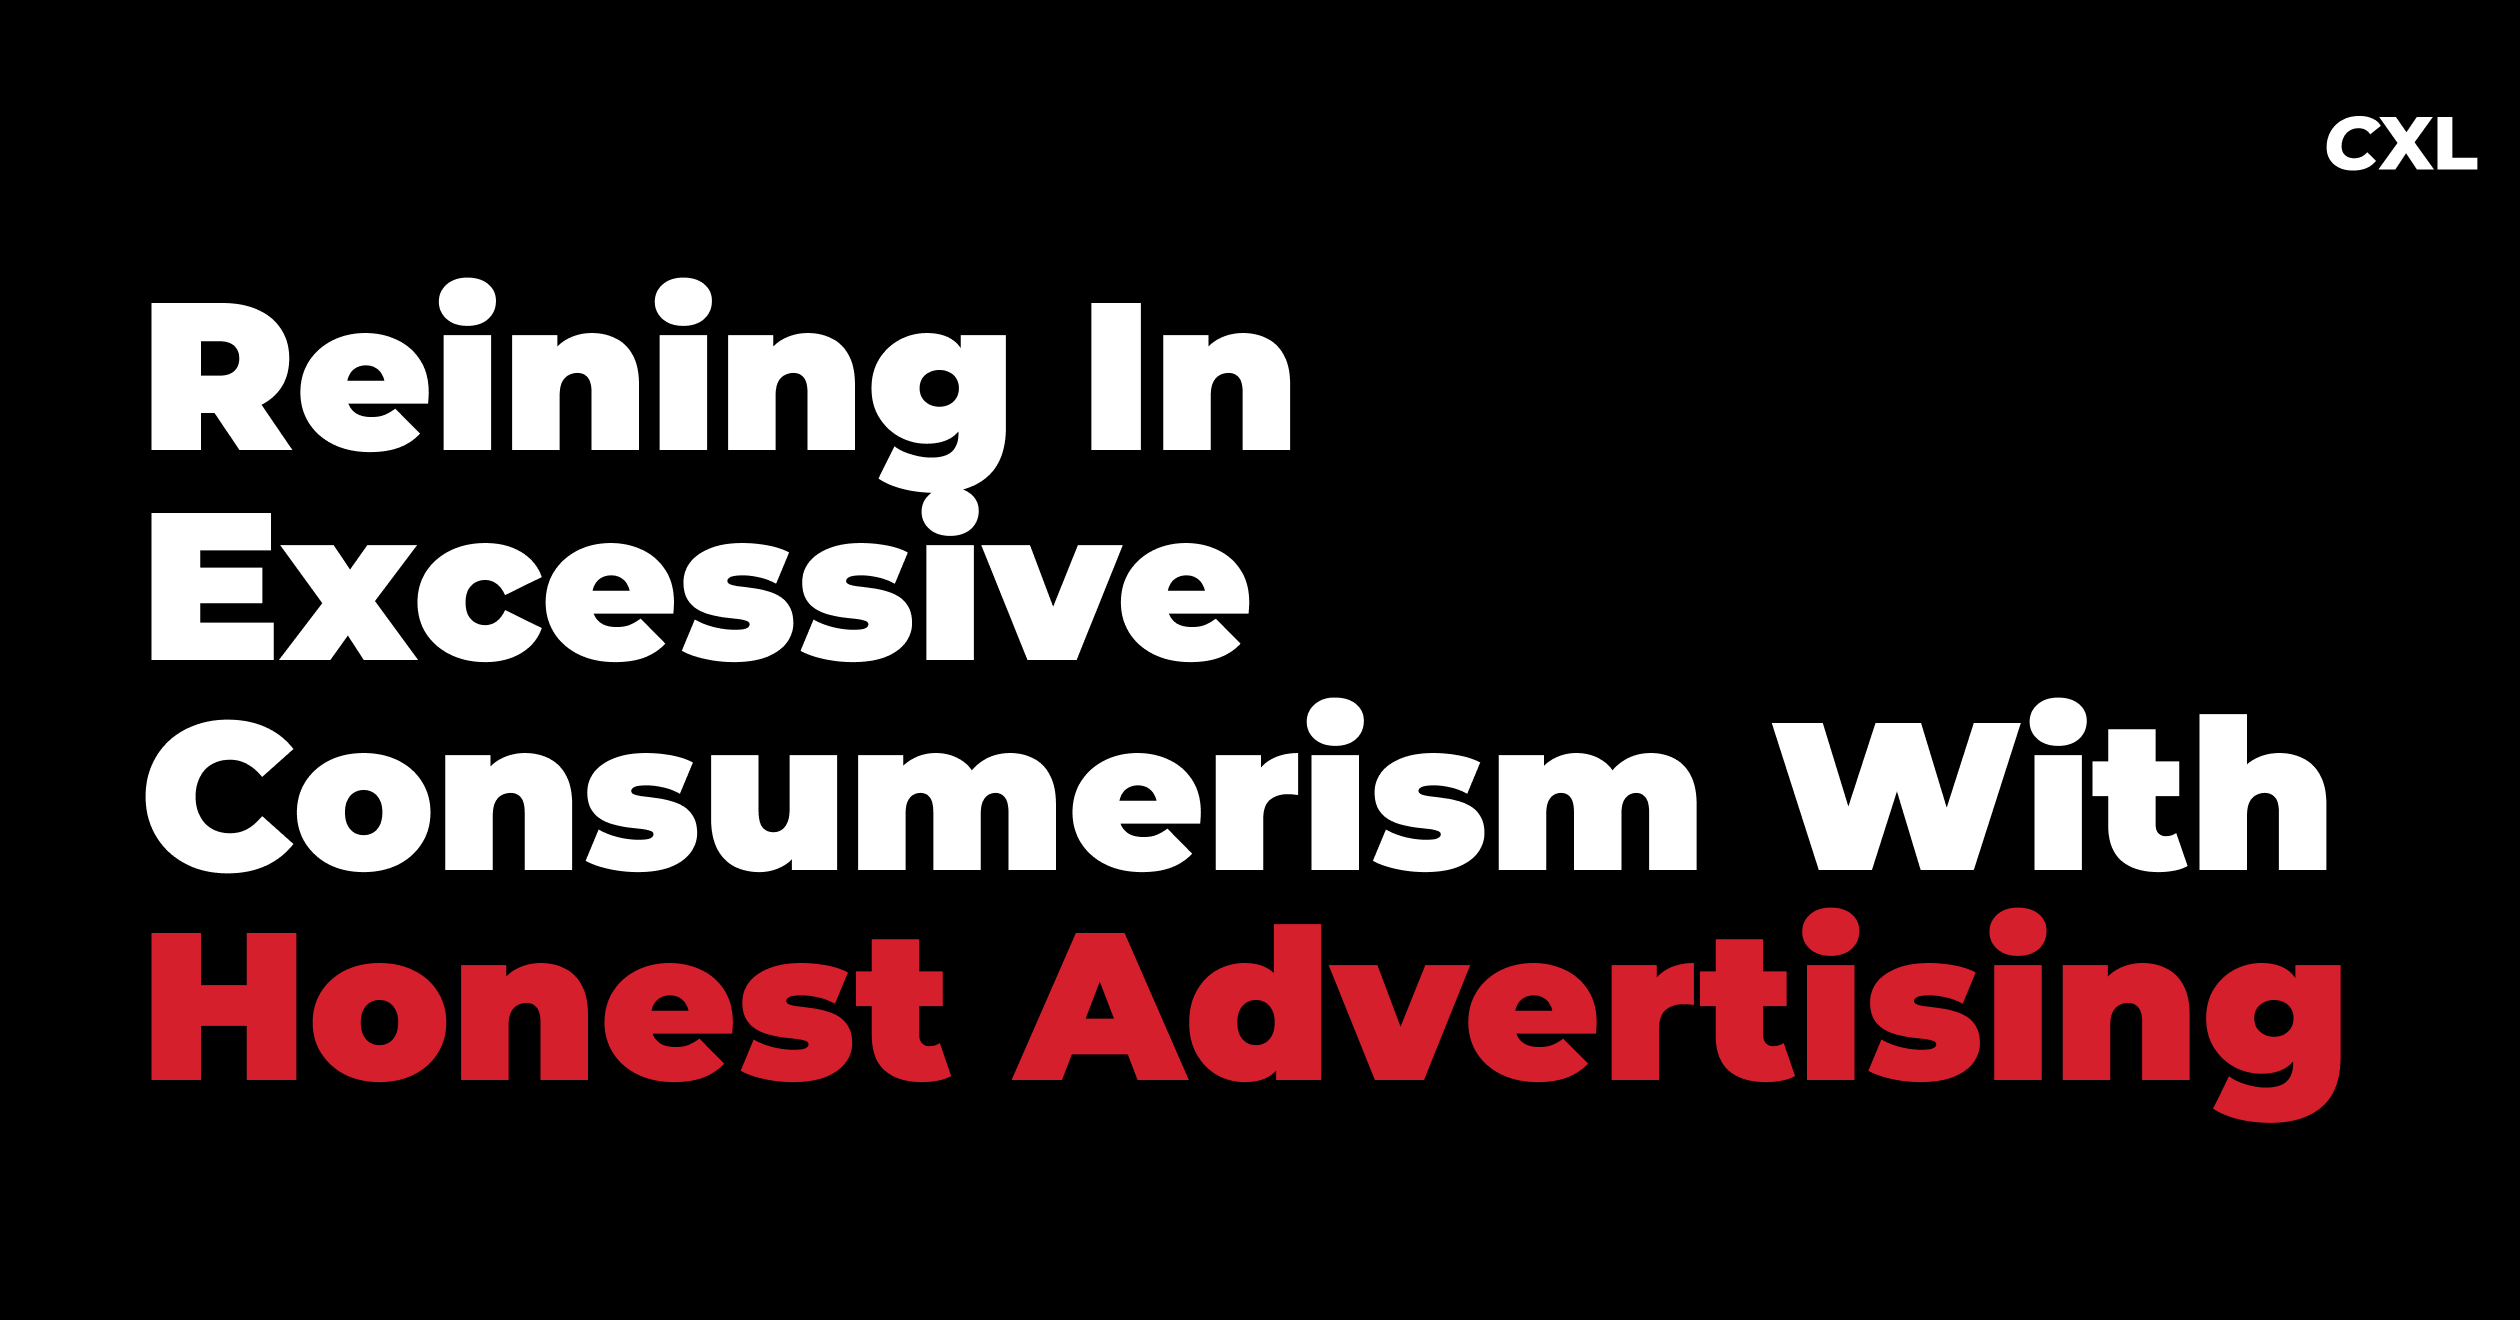 Use honest advertising to flip consumerism on its head (8 minute read)